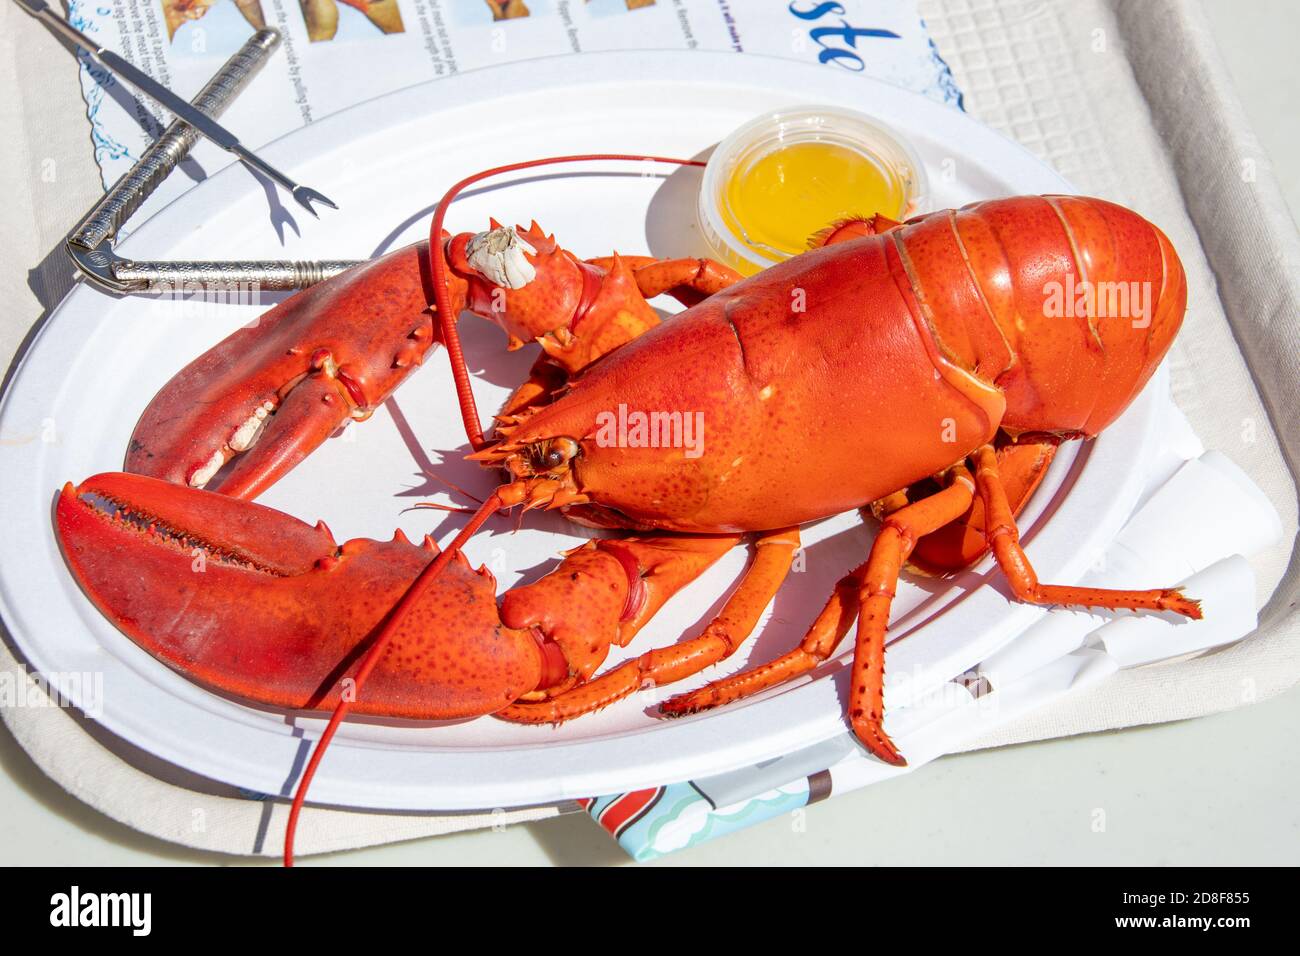 Whole lobster Quoddy Bay Lobster Restaurant, Eastport, Maine, USA Stock Photo